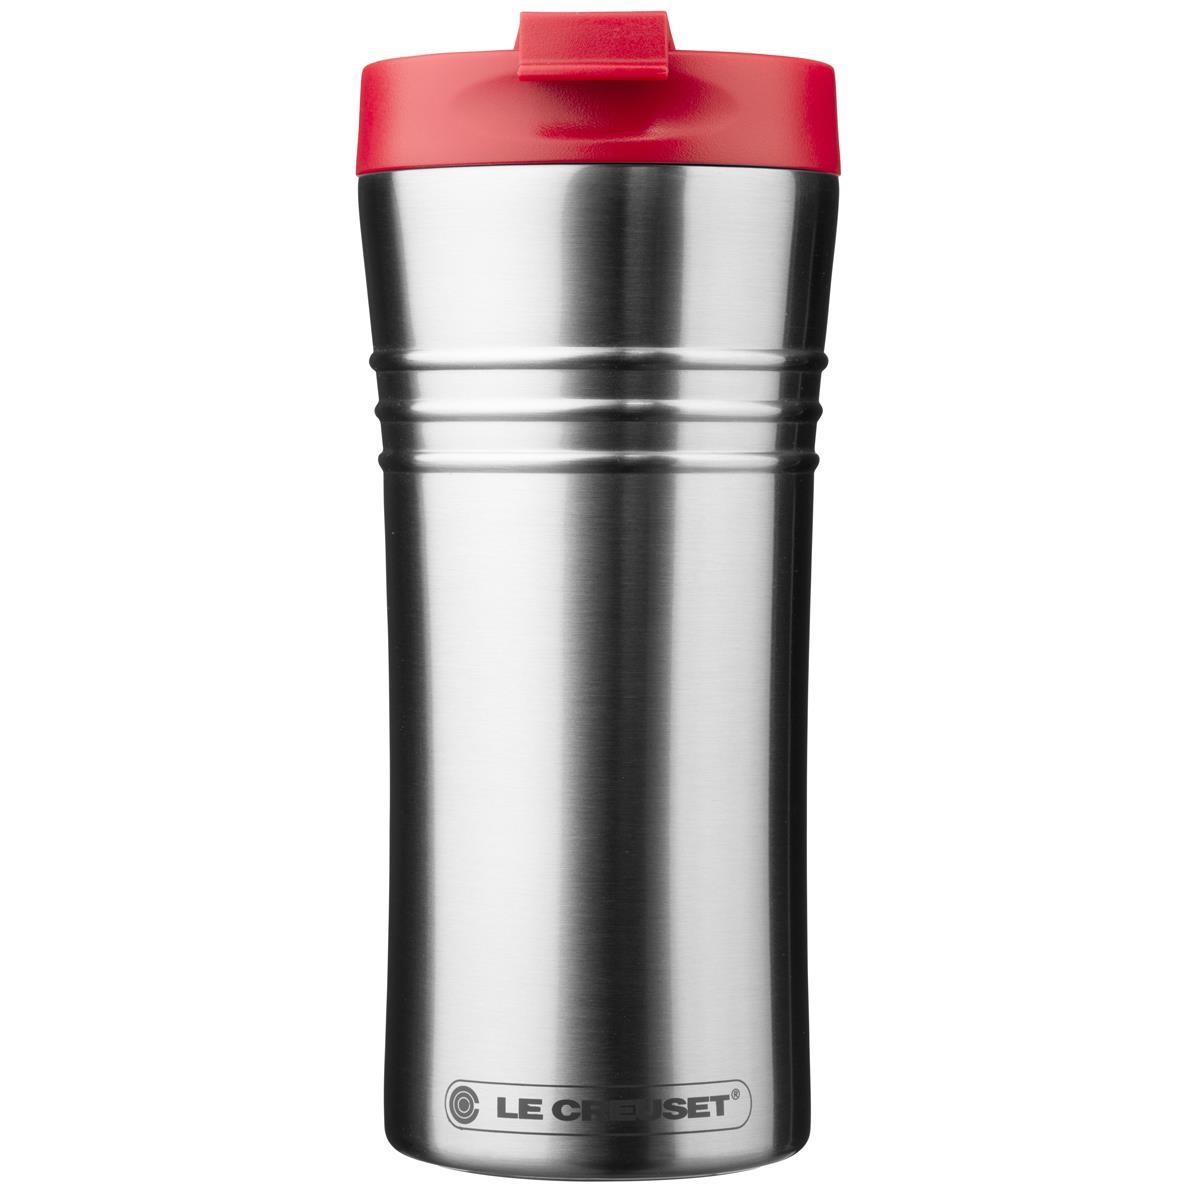 What is the capacity of the Le Creuset travel mug?